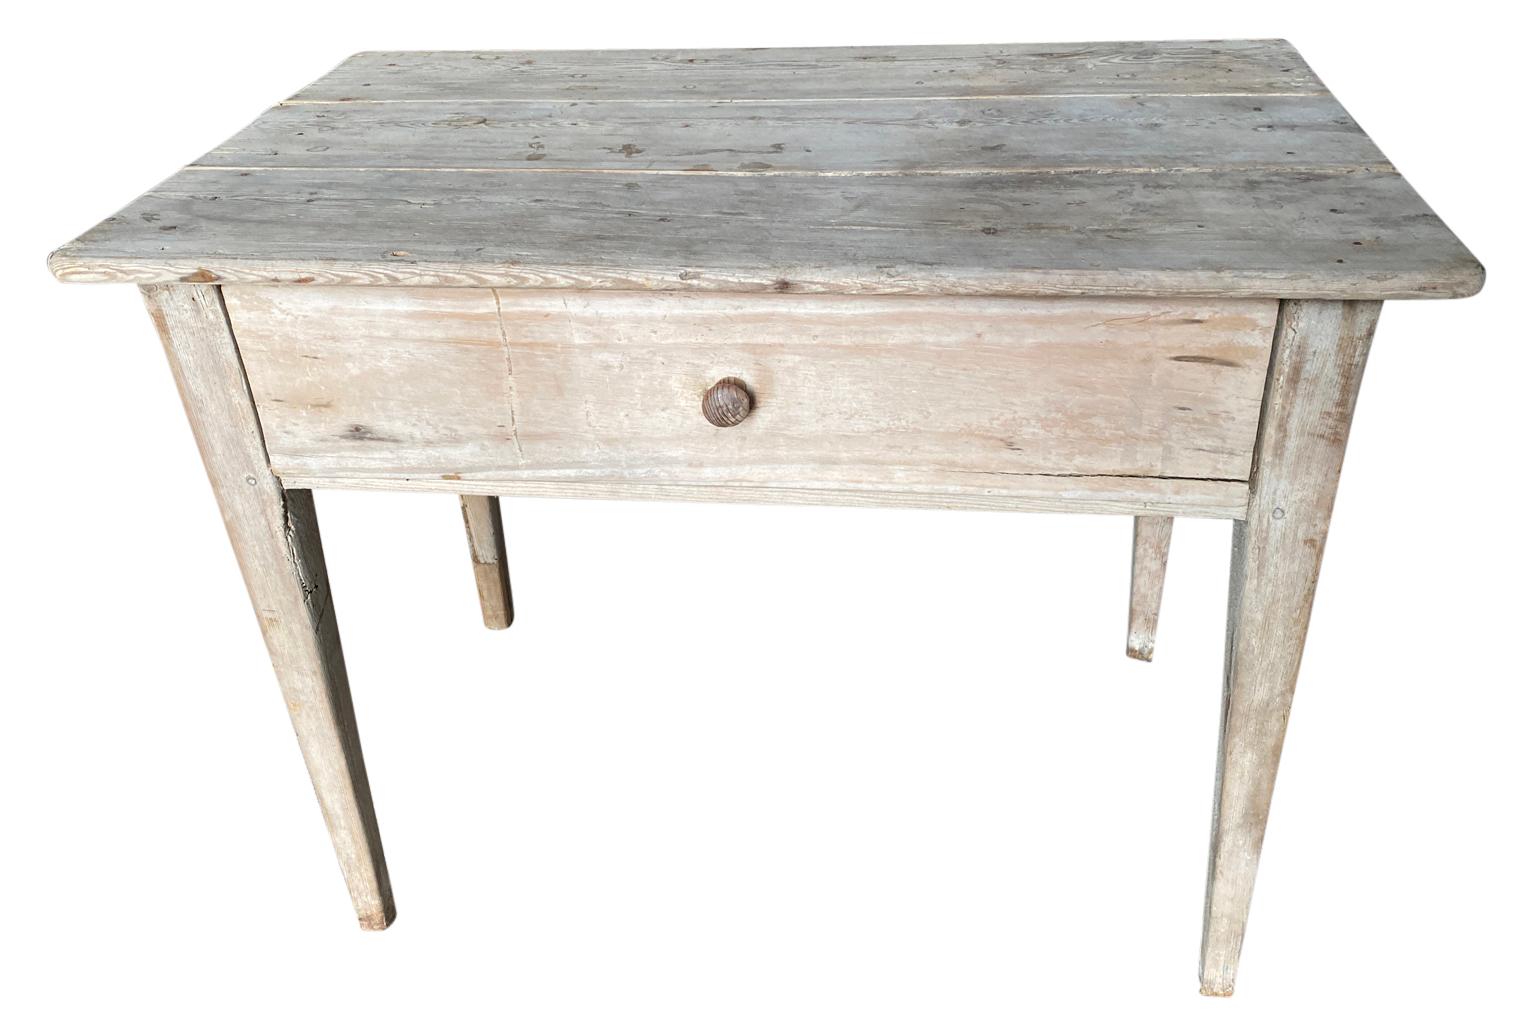 A very charming primitive mid-19th century console table - side table from the Catalan region of Spain. Soundly constructed from naturally washed pine with slightly tapered legs and a single door. Wonderful for any rustic or modern environment.